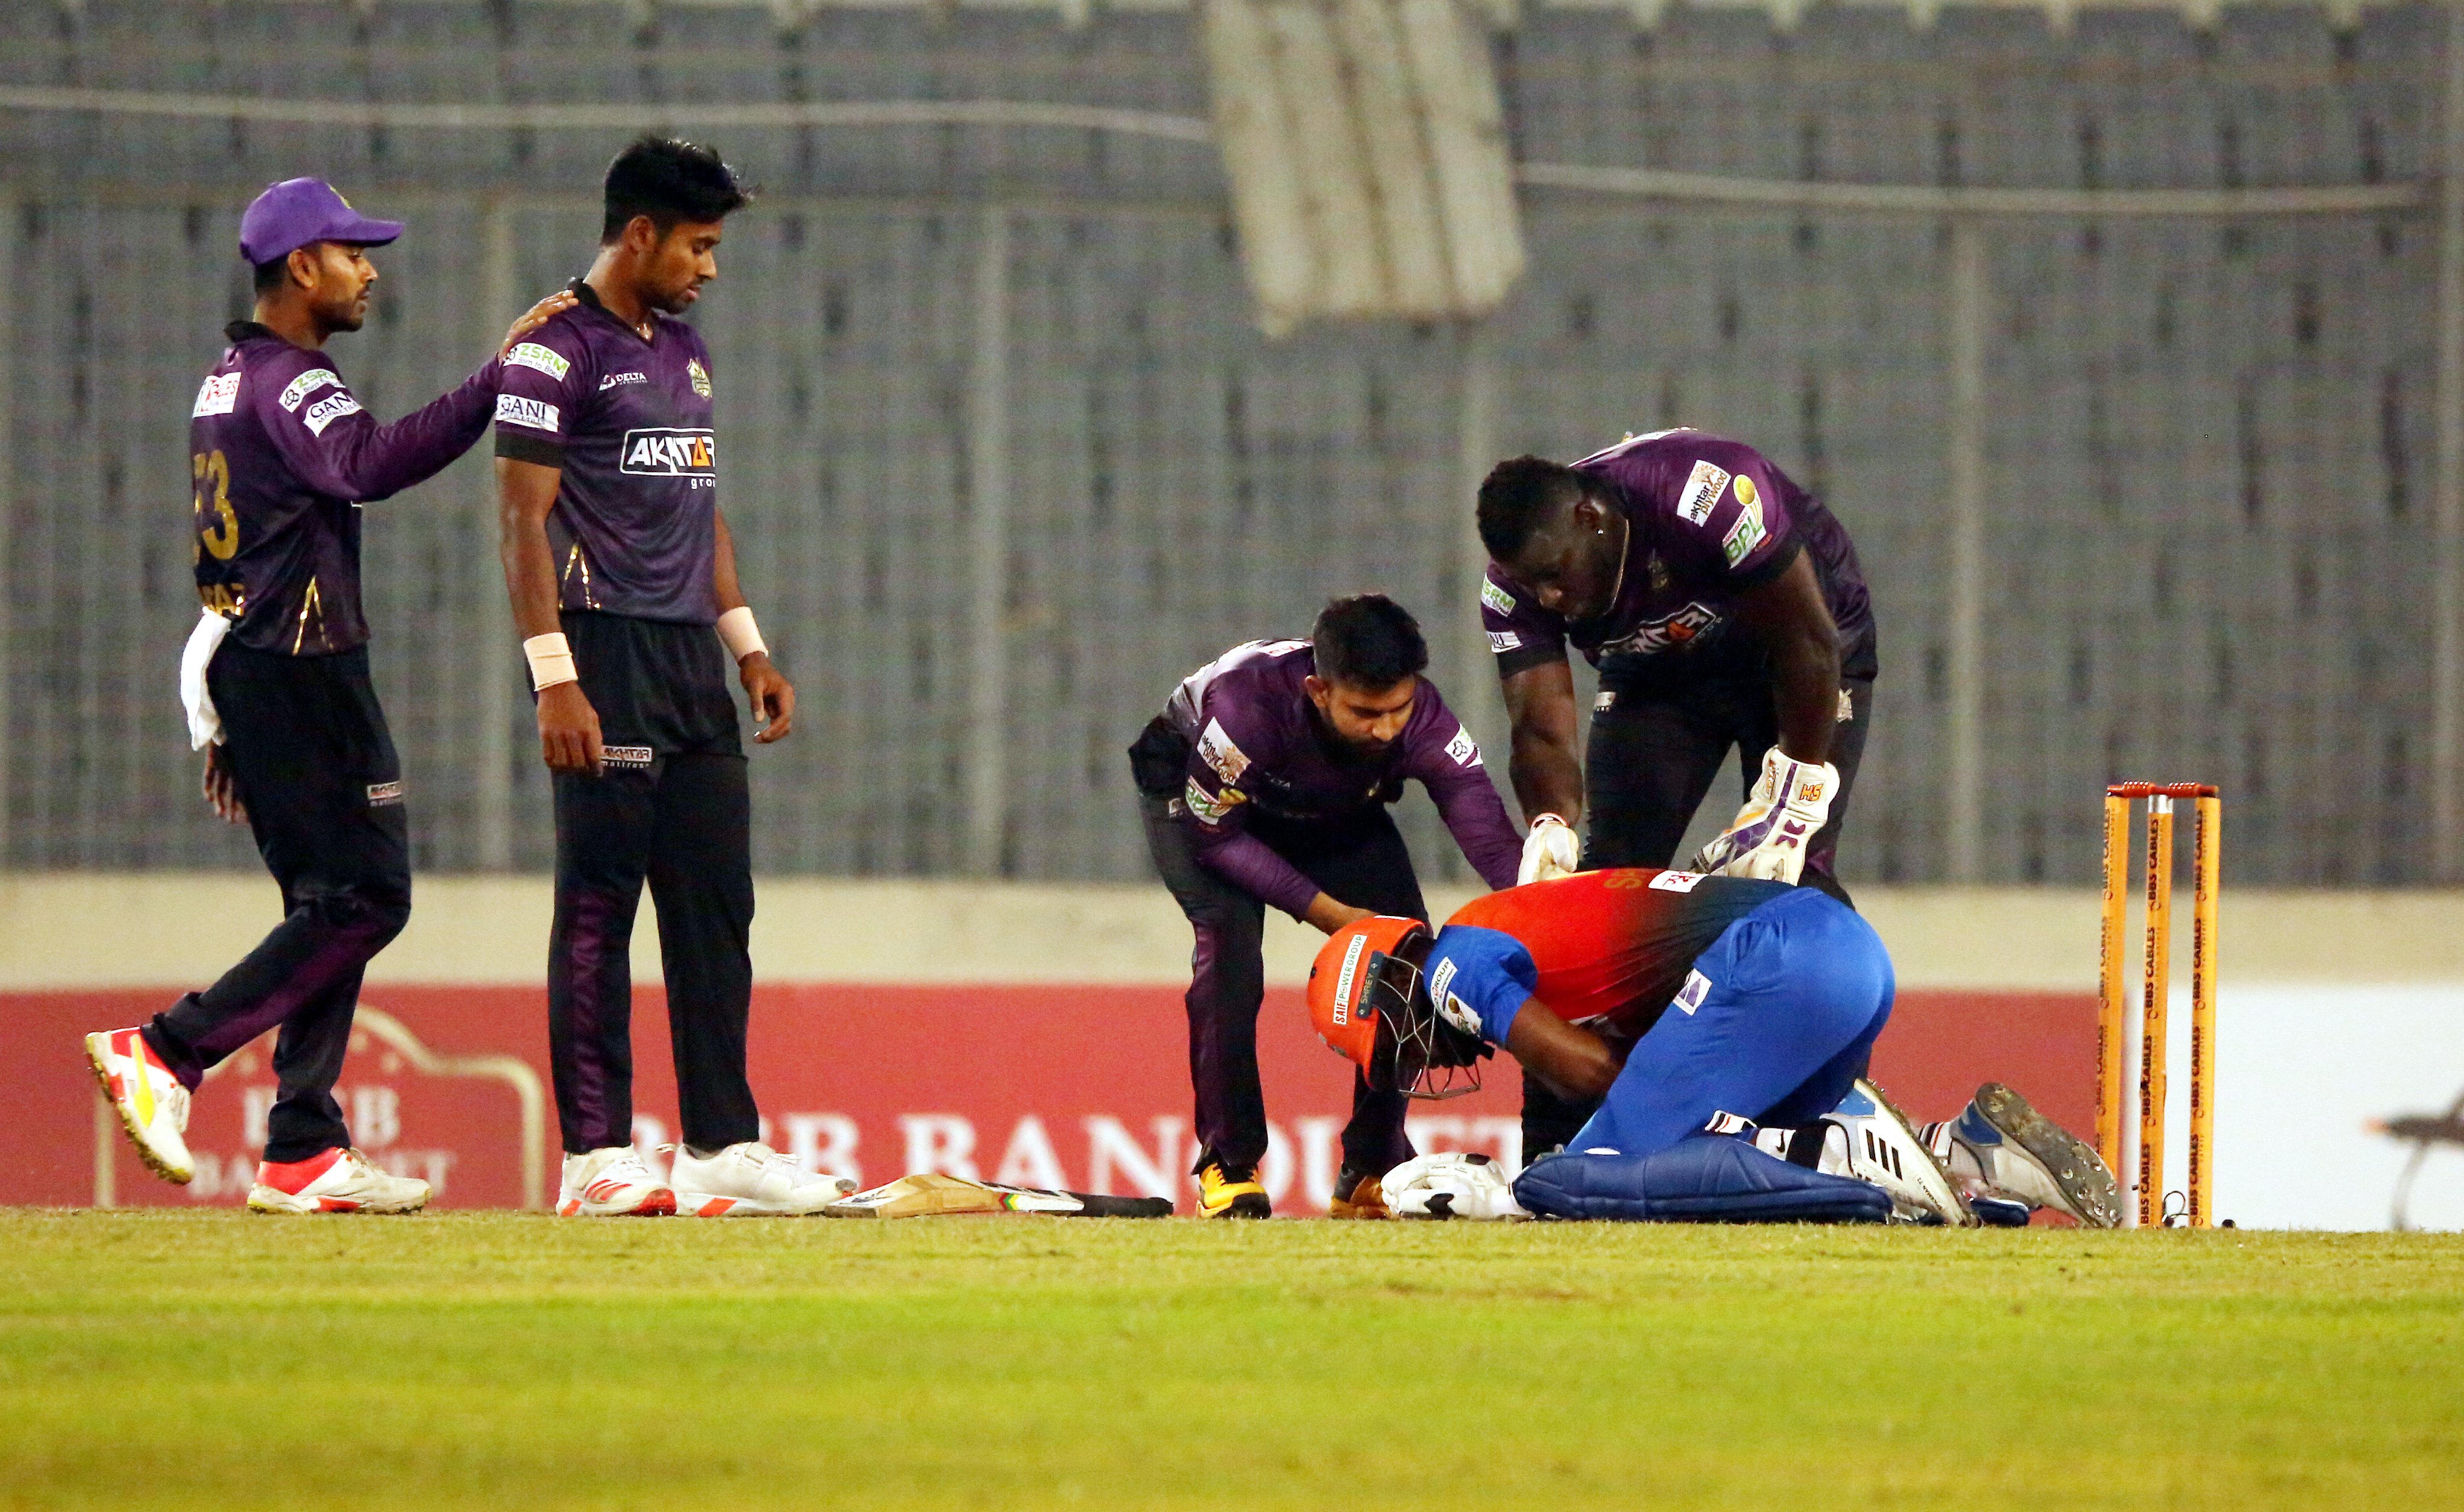 BPL 2022 | Andre Fletcher taken to hospital after taking a blow to the neck